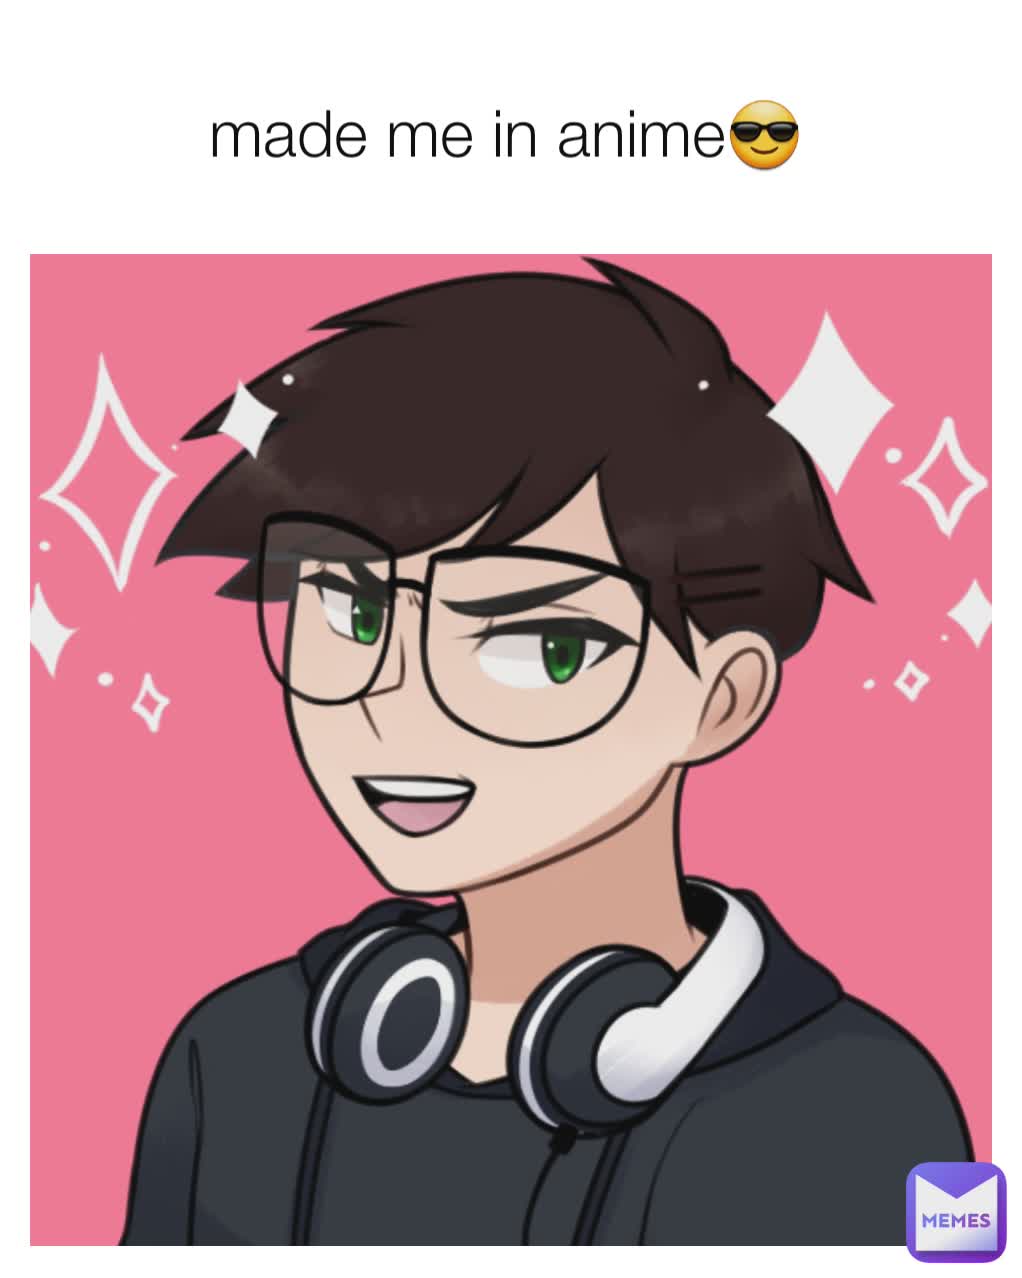 made me in anime😎